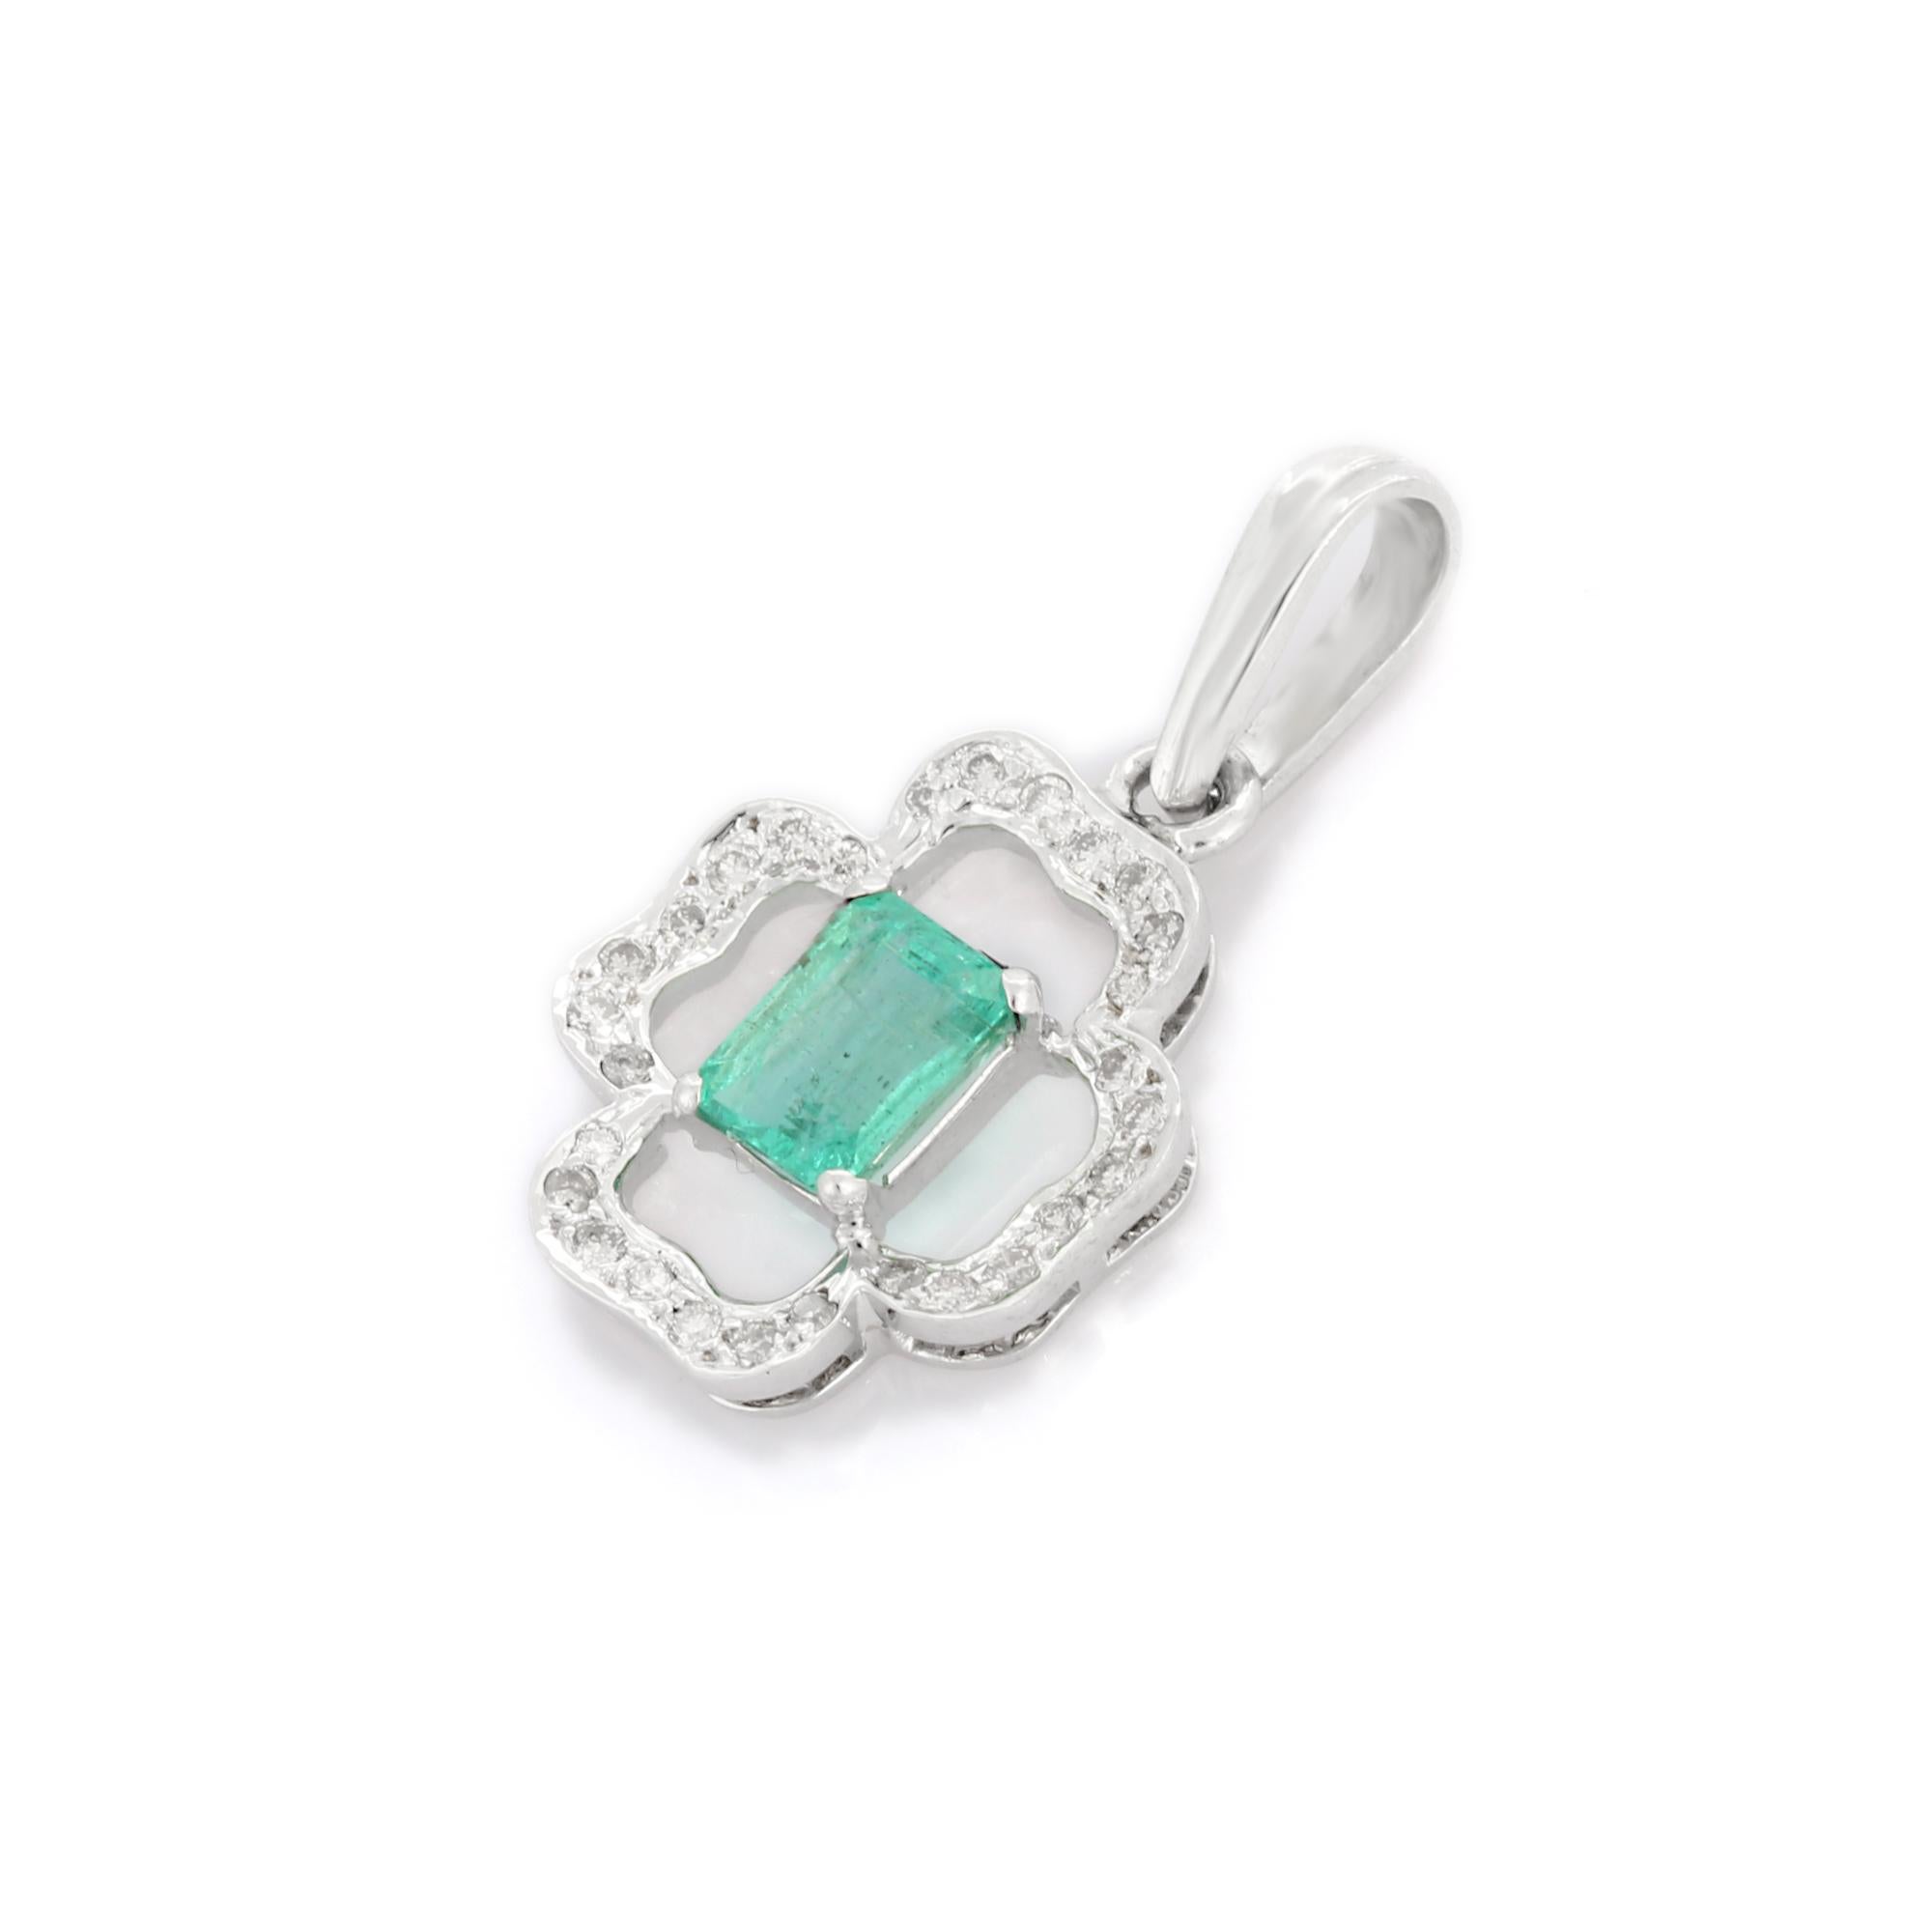 1.25 Carat Emerald Floral Diamond Pendant in 18K White Gold In New Condition For Sale In Houston, TX